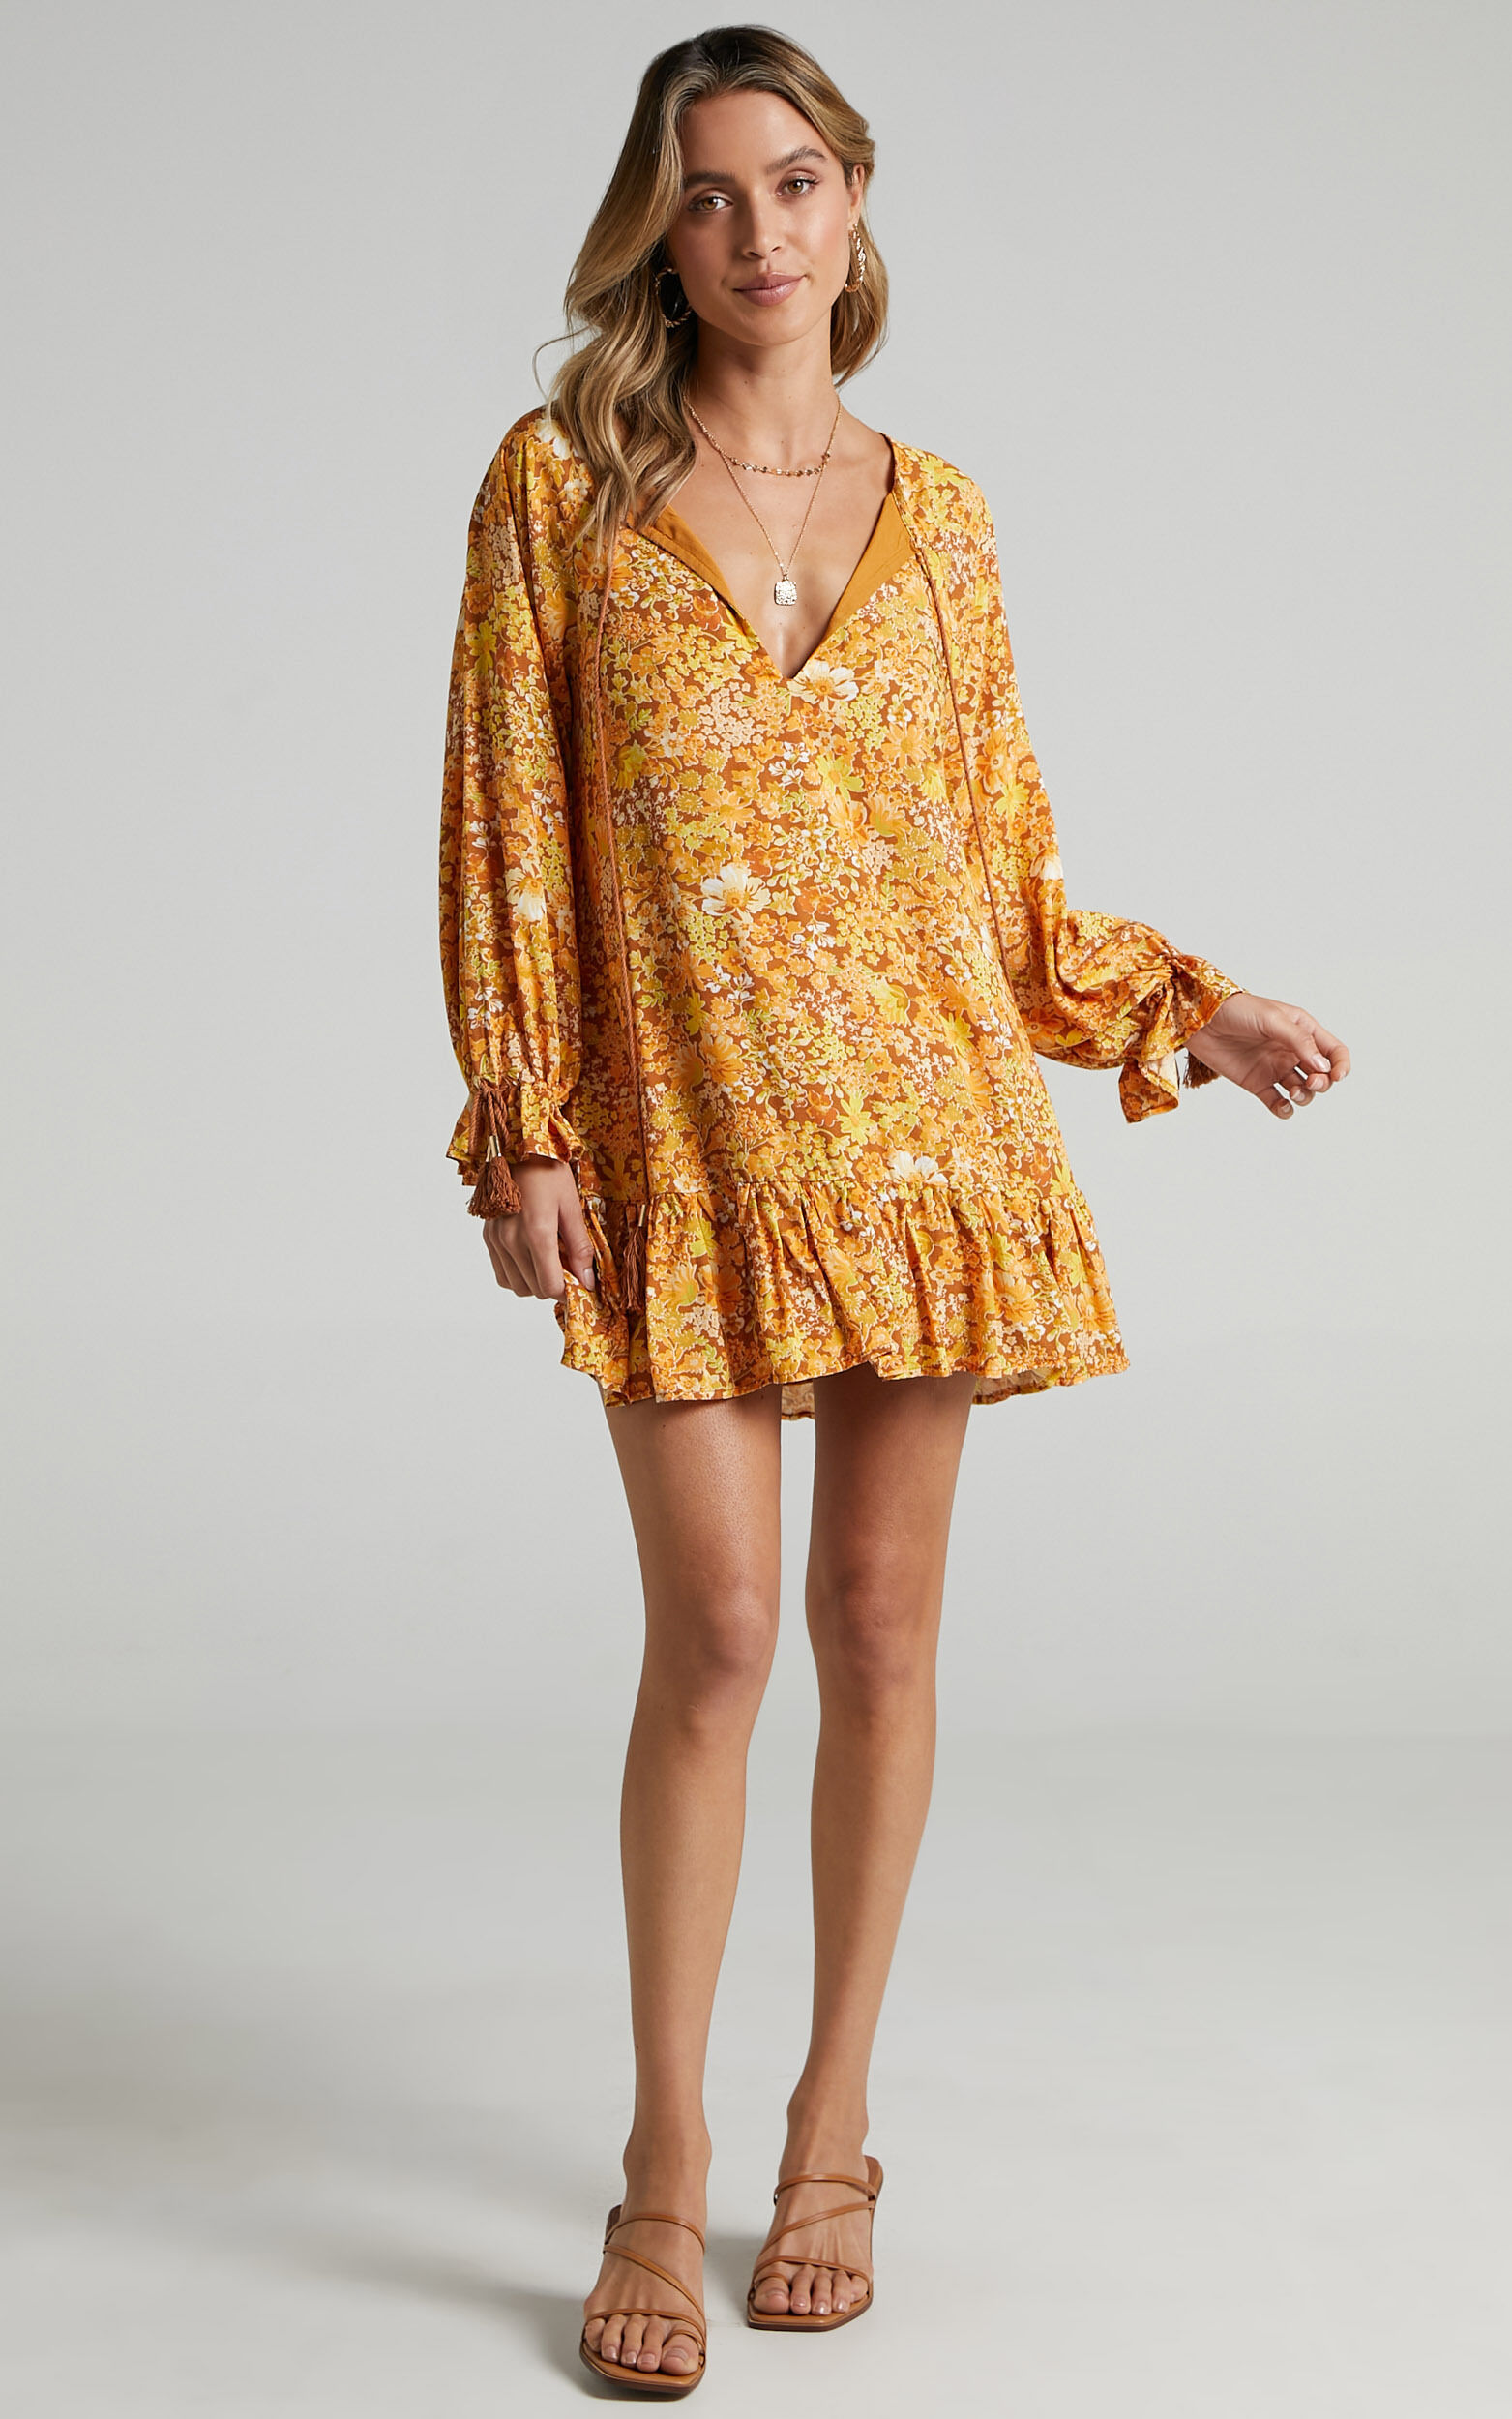 Sian Long Sleeve Mini Dress in Rustic Floral - 06, ORG1, super-hi-res image number null